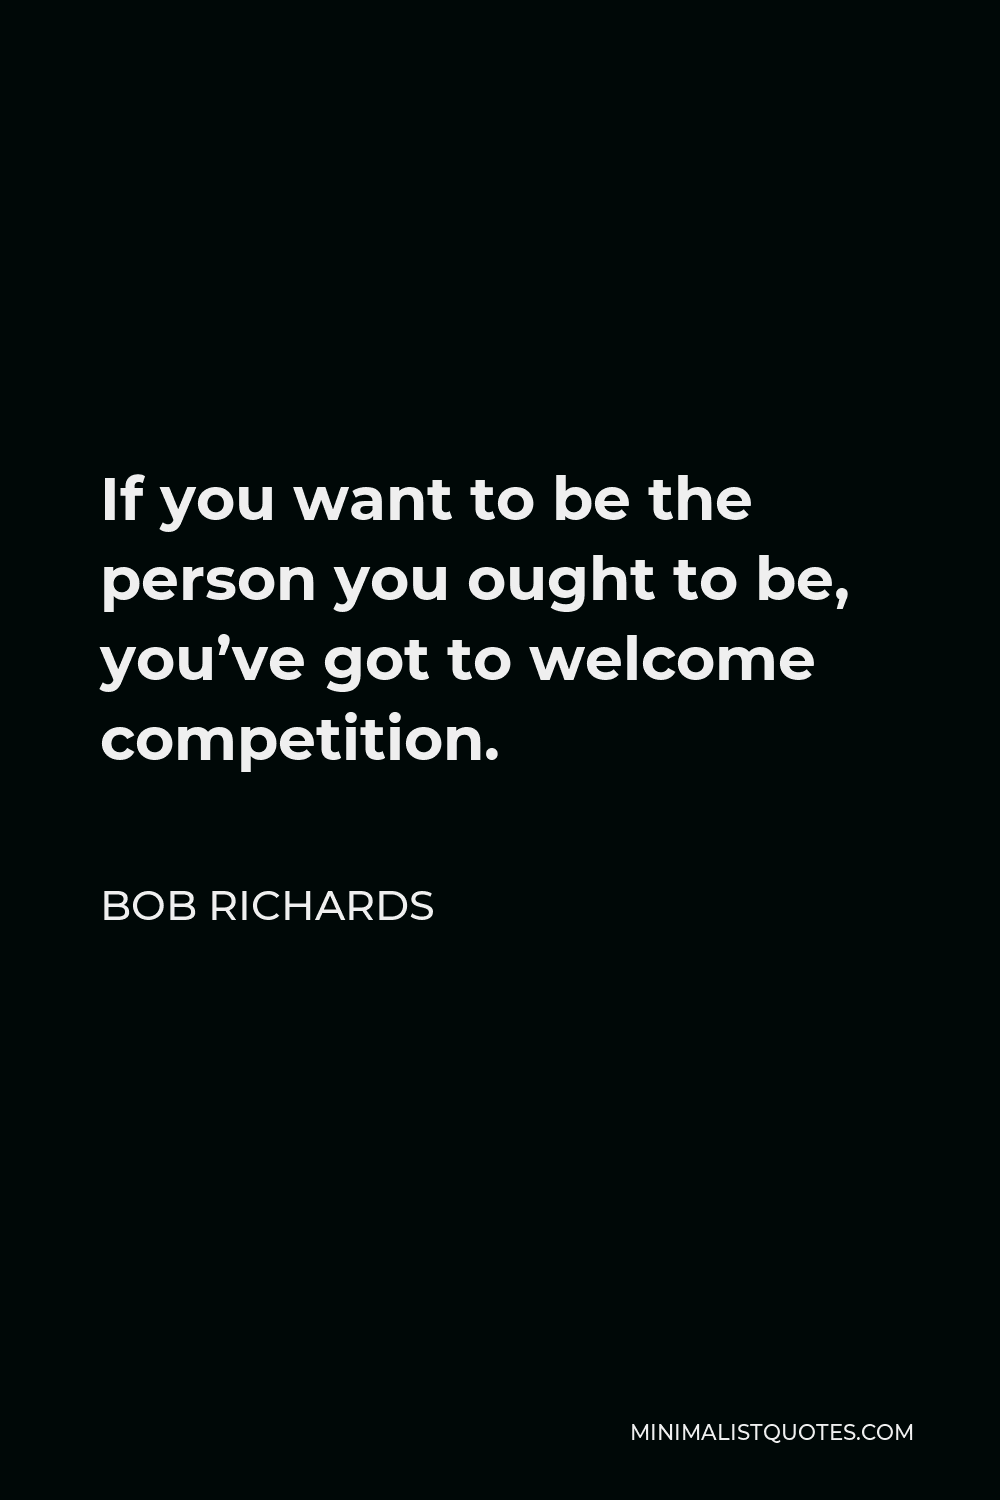 Bob Richards Quote - If you want to be the person you ought to be, you’ve got to welcome competition.